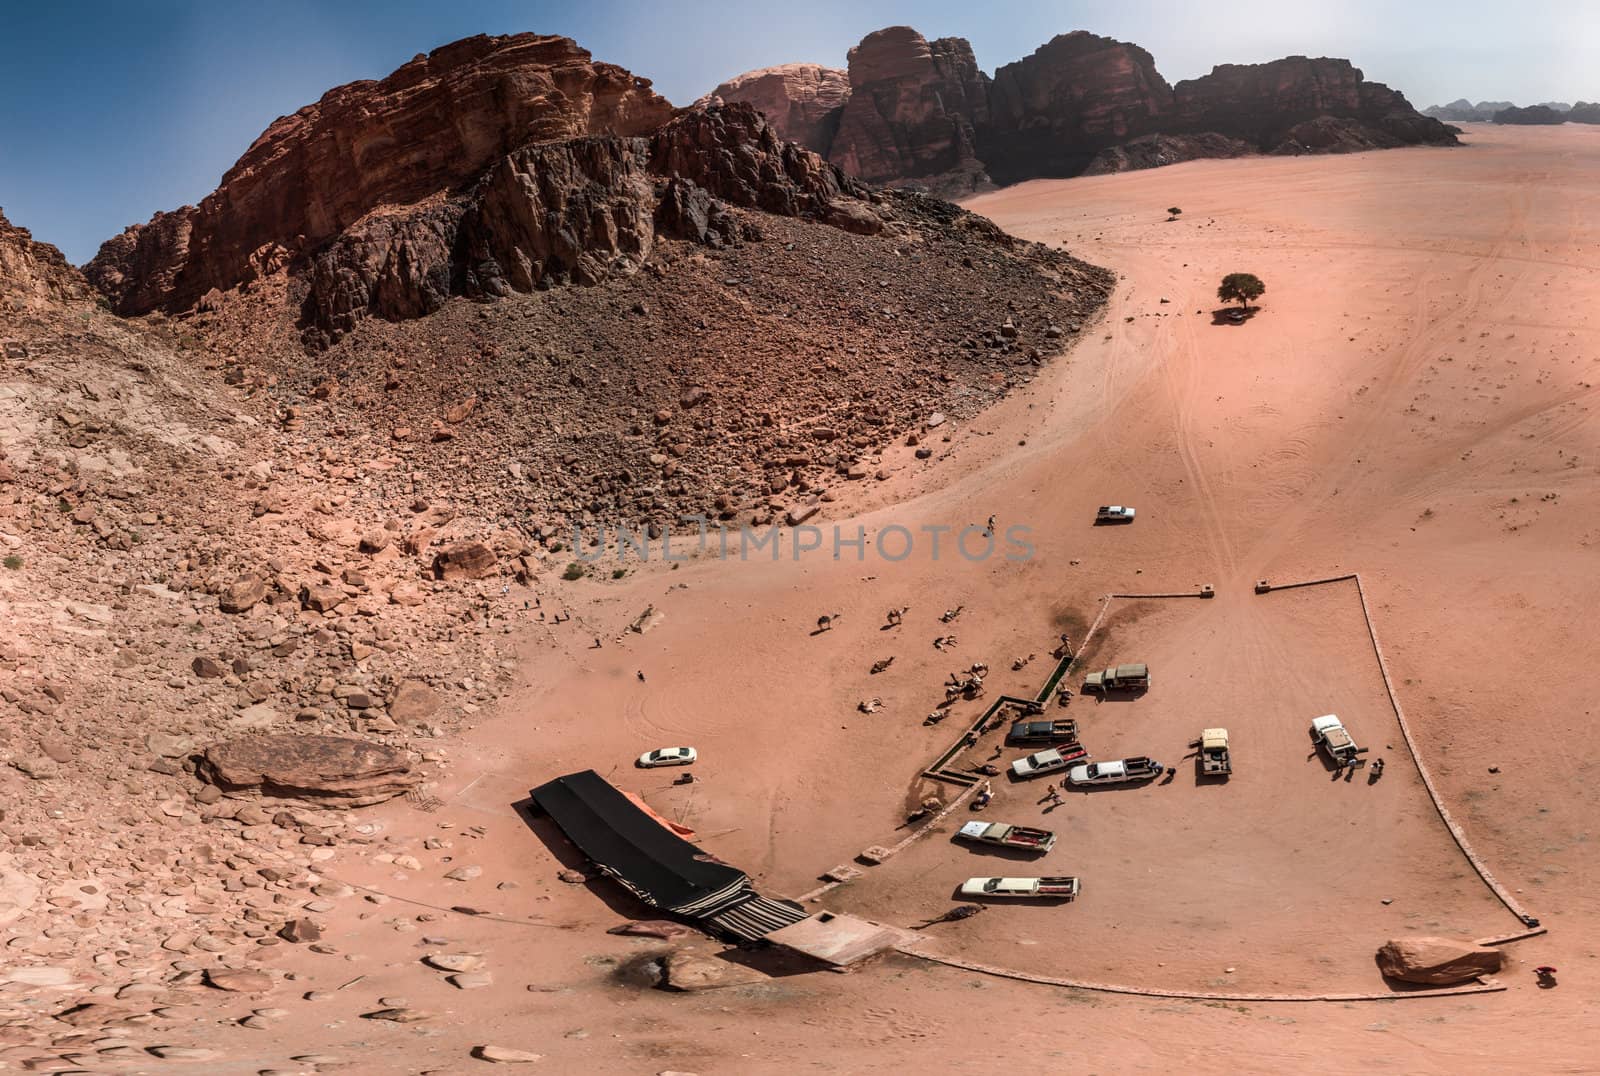 Aerial view of the Lawrence spring in the Jordanian desert near Wadi Rum by geogif